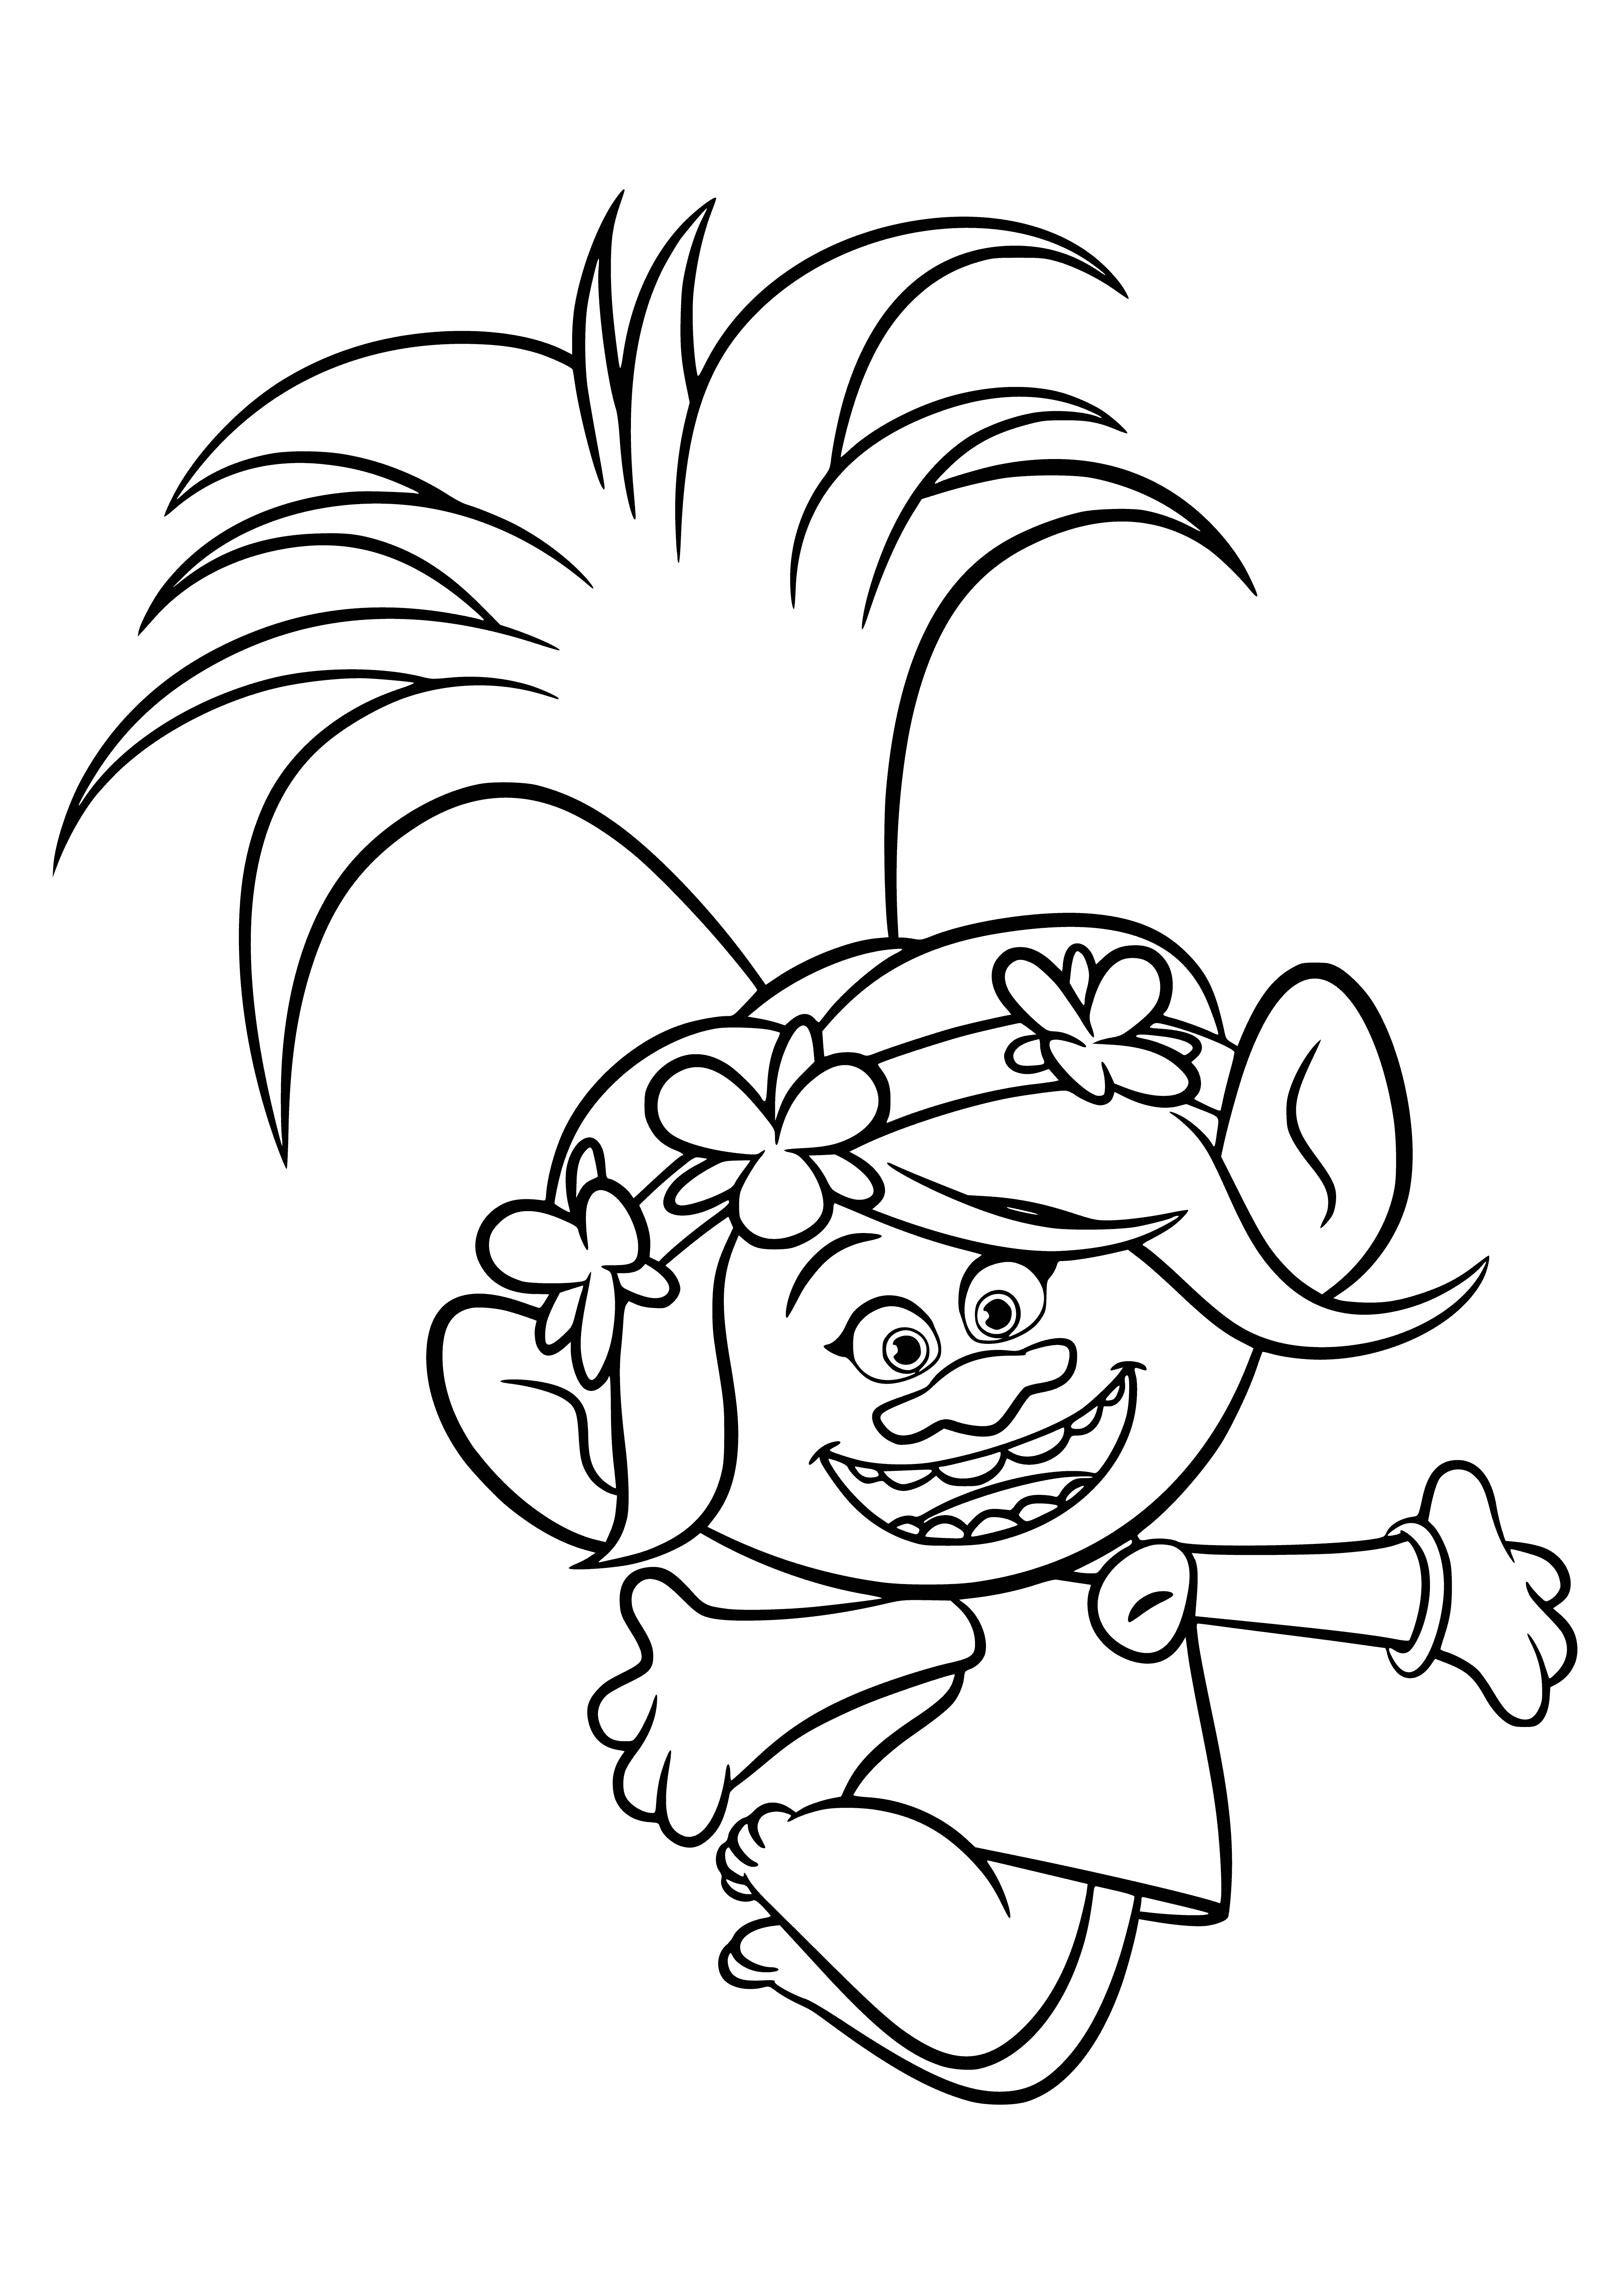 coloring page: Rosette Troll has teal skin, purple hair, pink bodice & yellow skirt with pink flowers, and yellow shoes with pink laces.